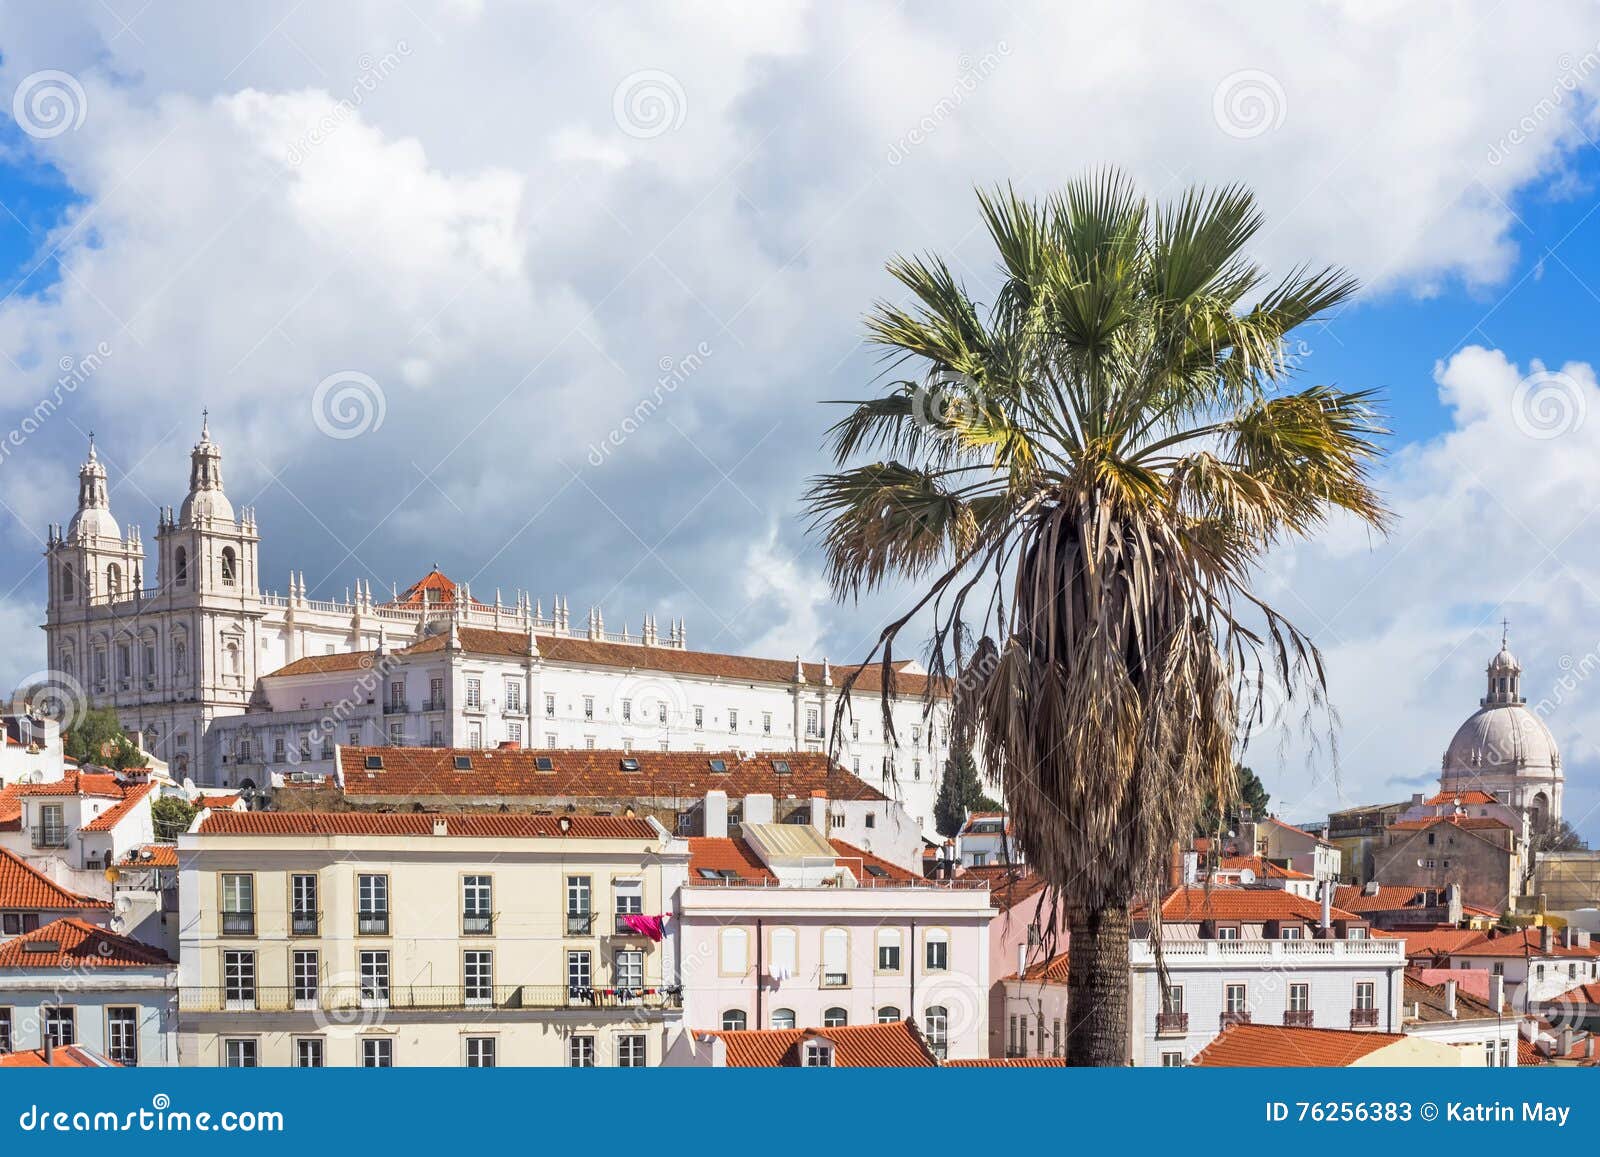 view of lisbon, portugal, with palm tree in the foreground